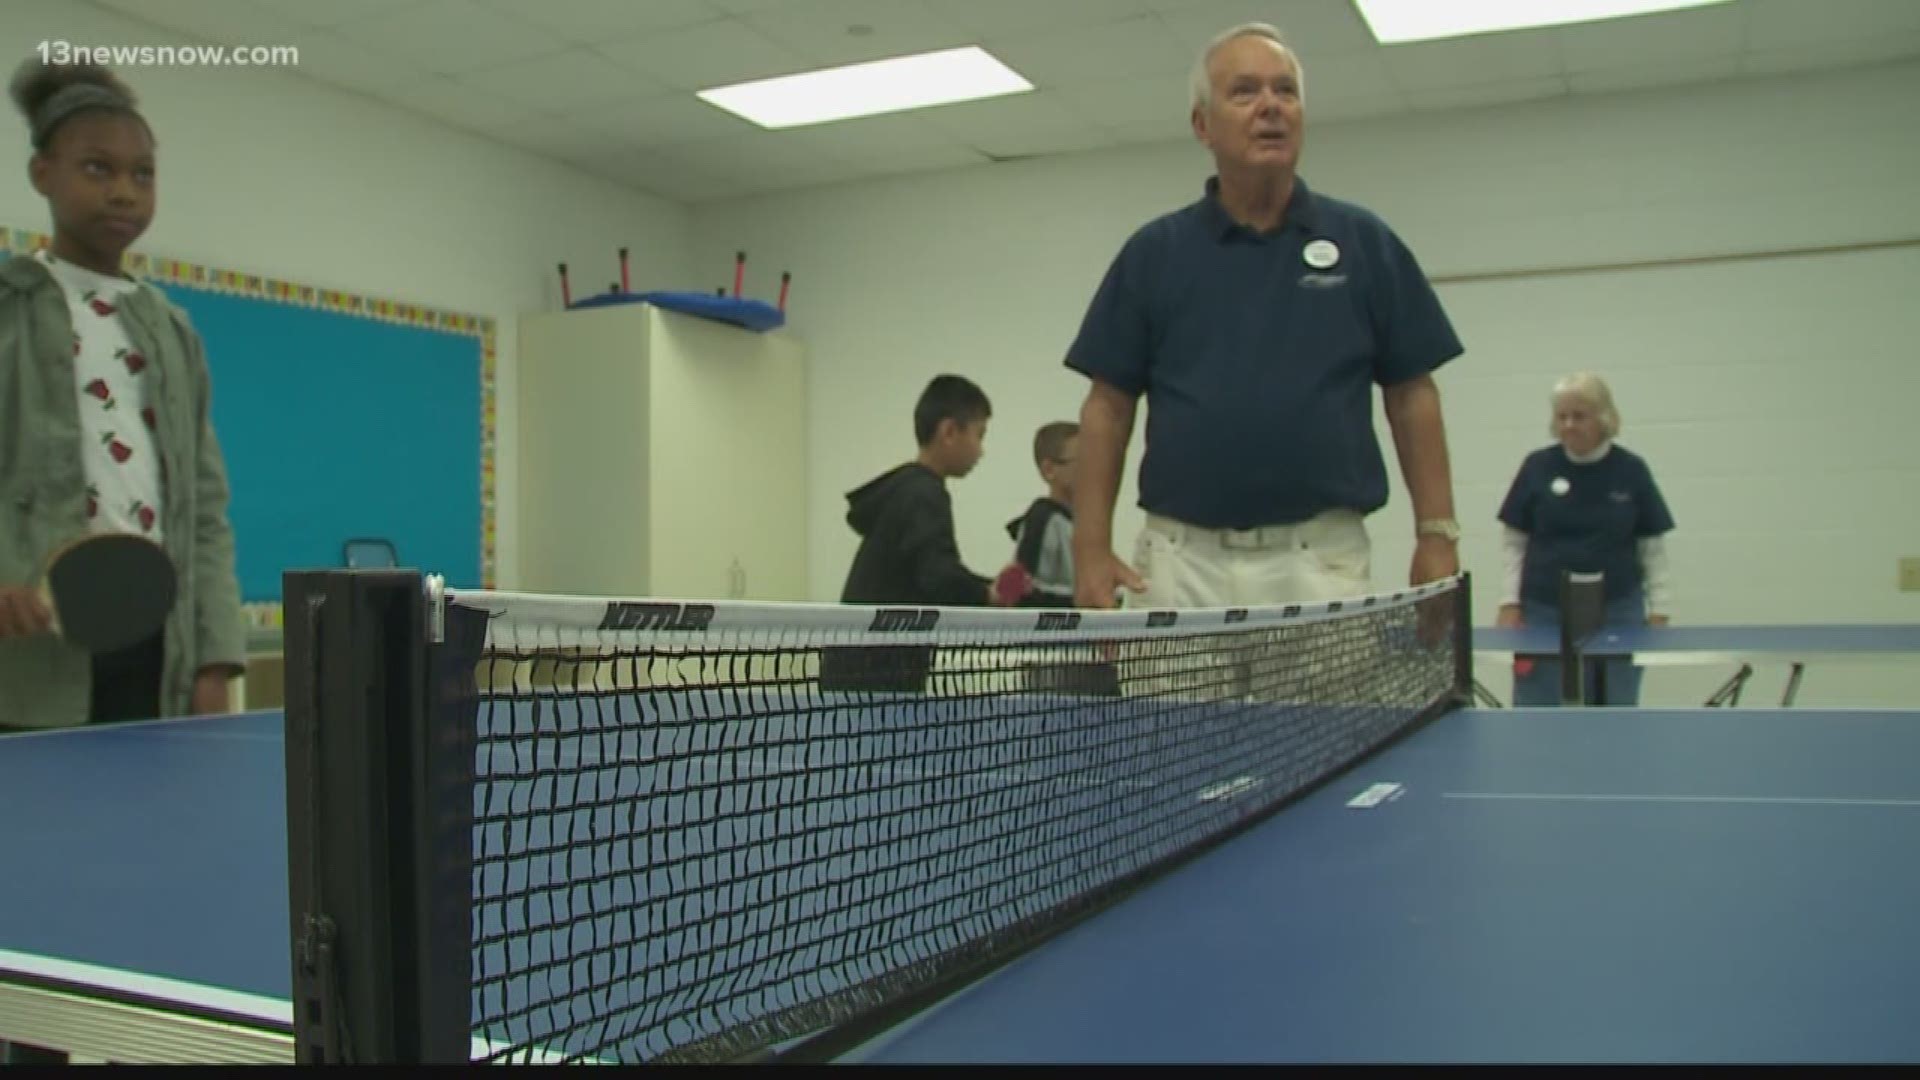 A group of retirees, who double as amateur ping-pong players, teach elementary students ping-pong proving it can become a life-long hobby.